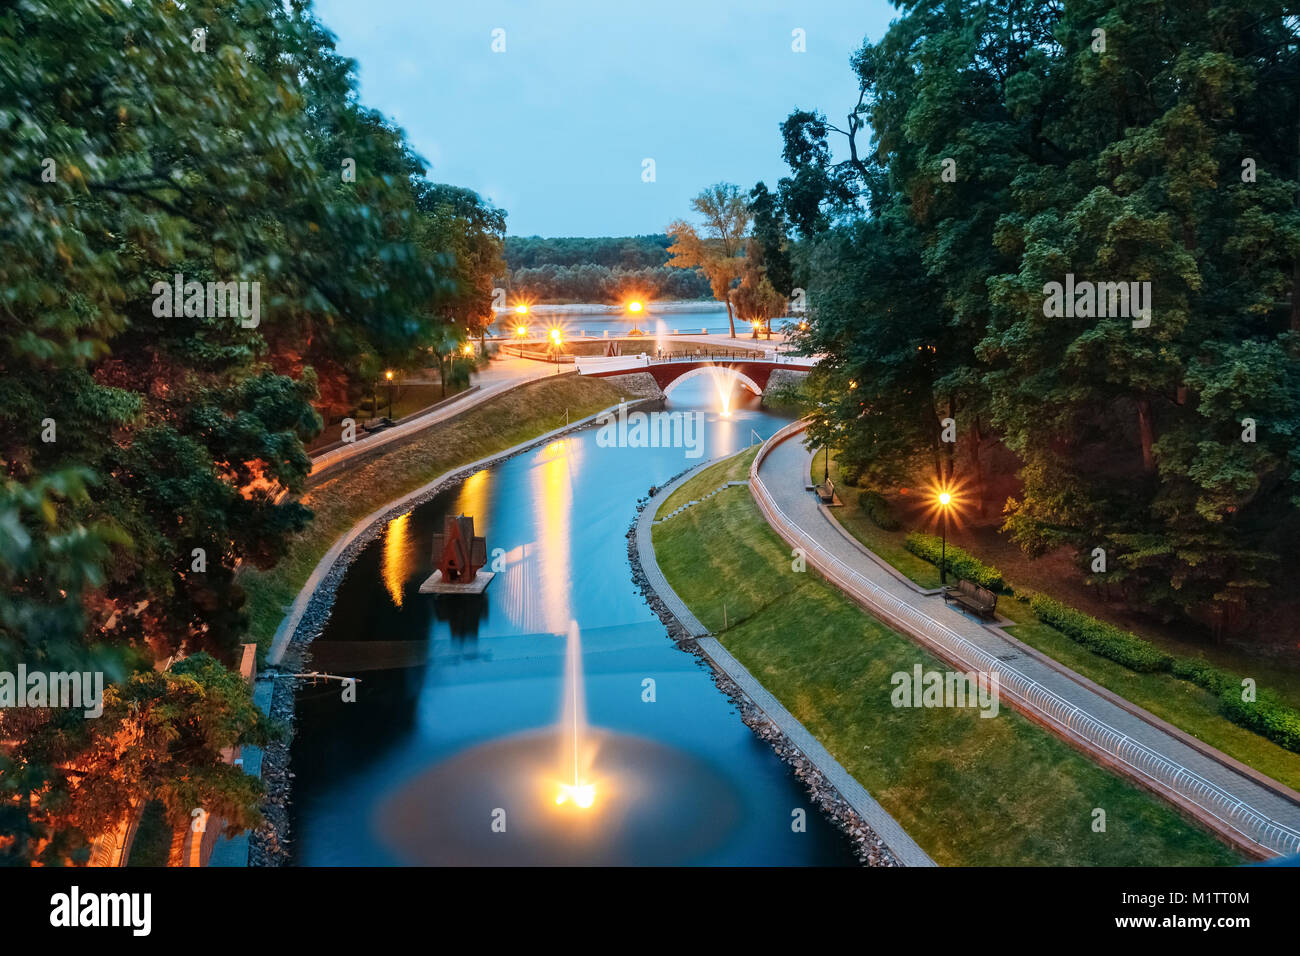 Water canal in the city park with the lights and night illumination over a stone bridge leading to the river Sozh Stock Photo